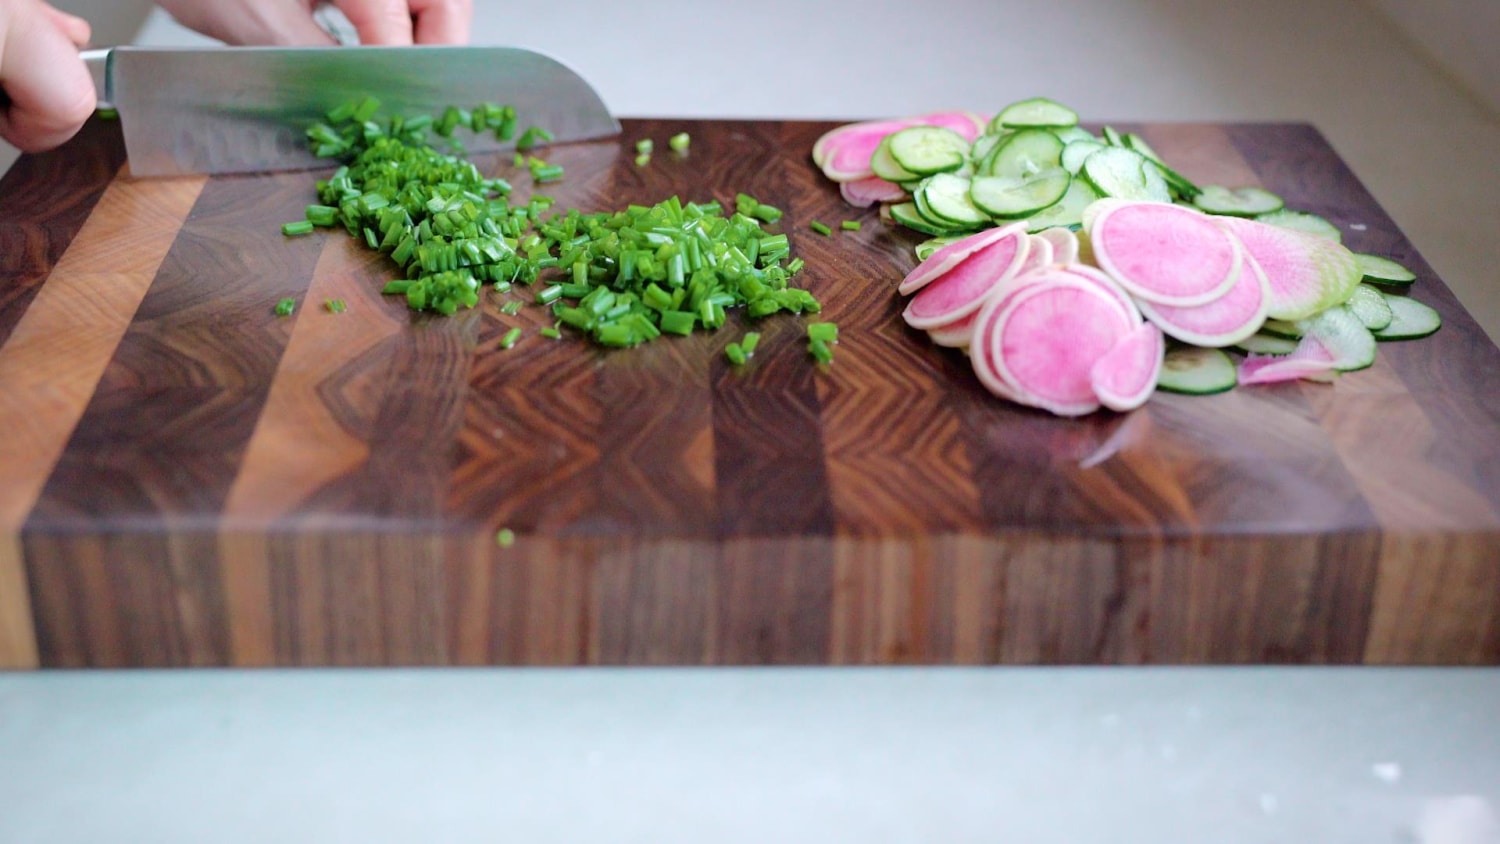 How to Clean Wooden Cutting Board : Food Network, Help Around the Kitchen  : Food Network